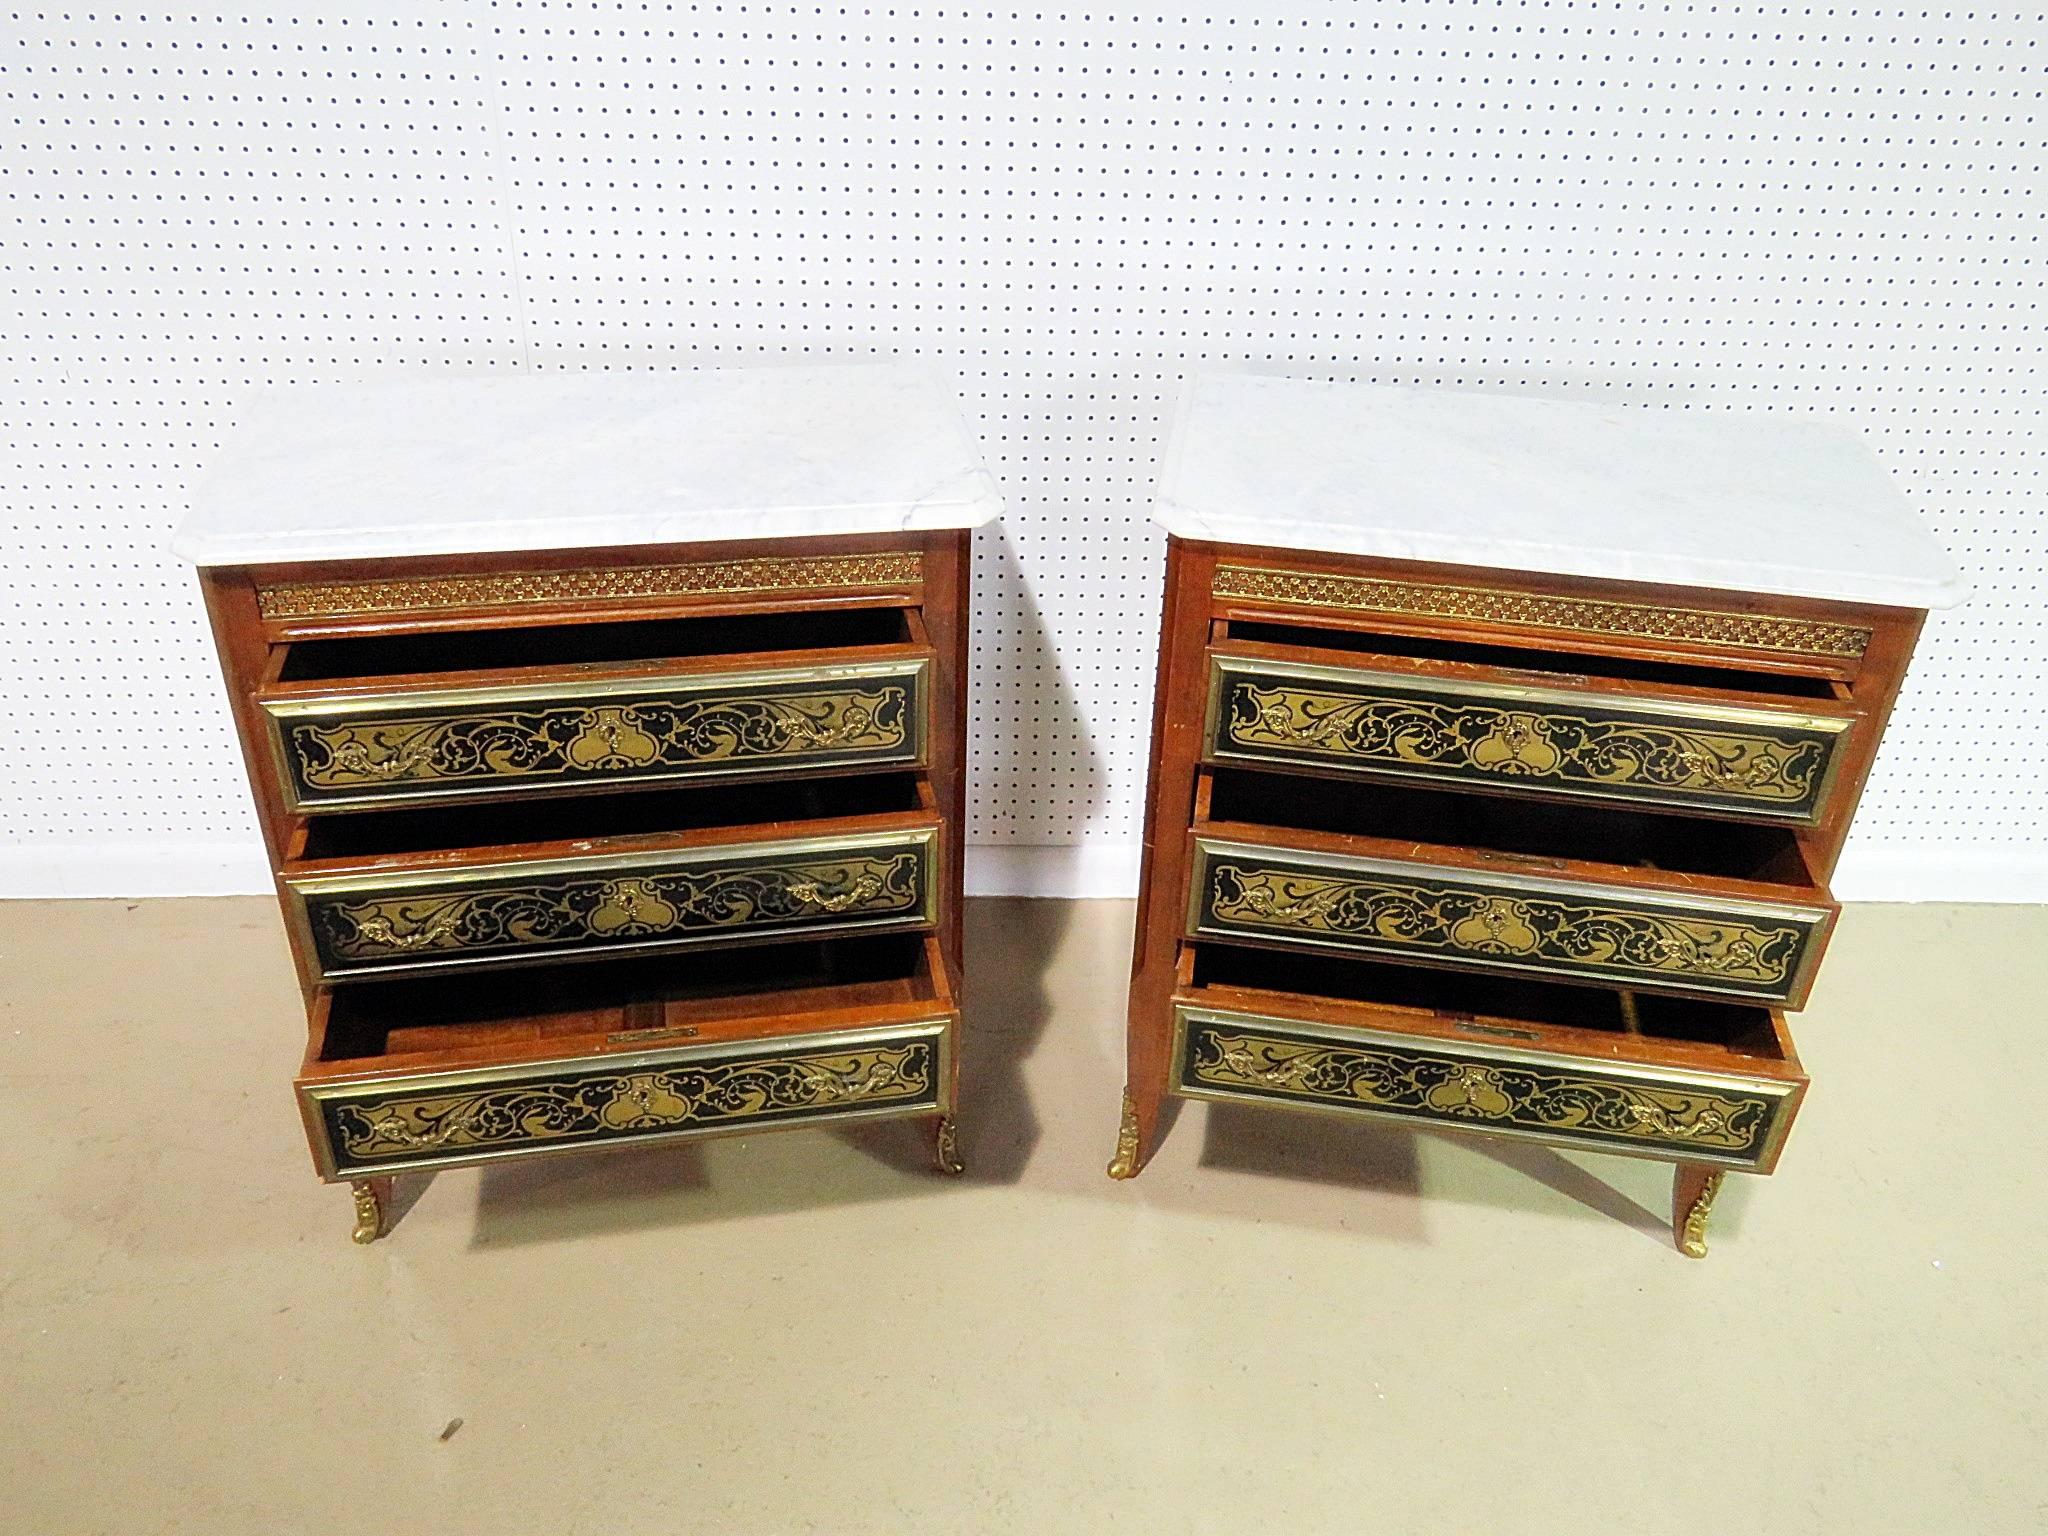 Pair of Empire style marble top three-drawer ebonized commodes with bronze mounts.